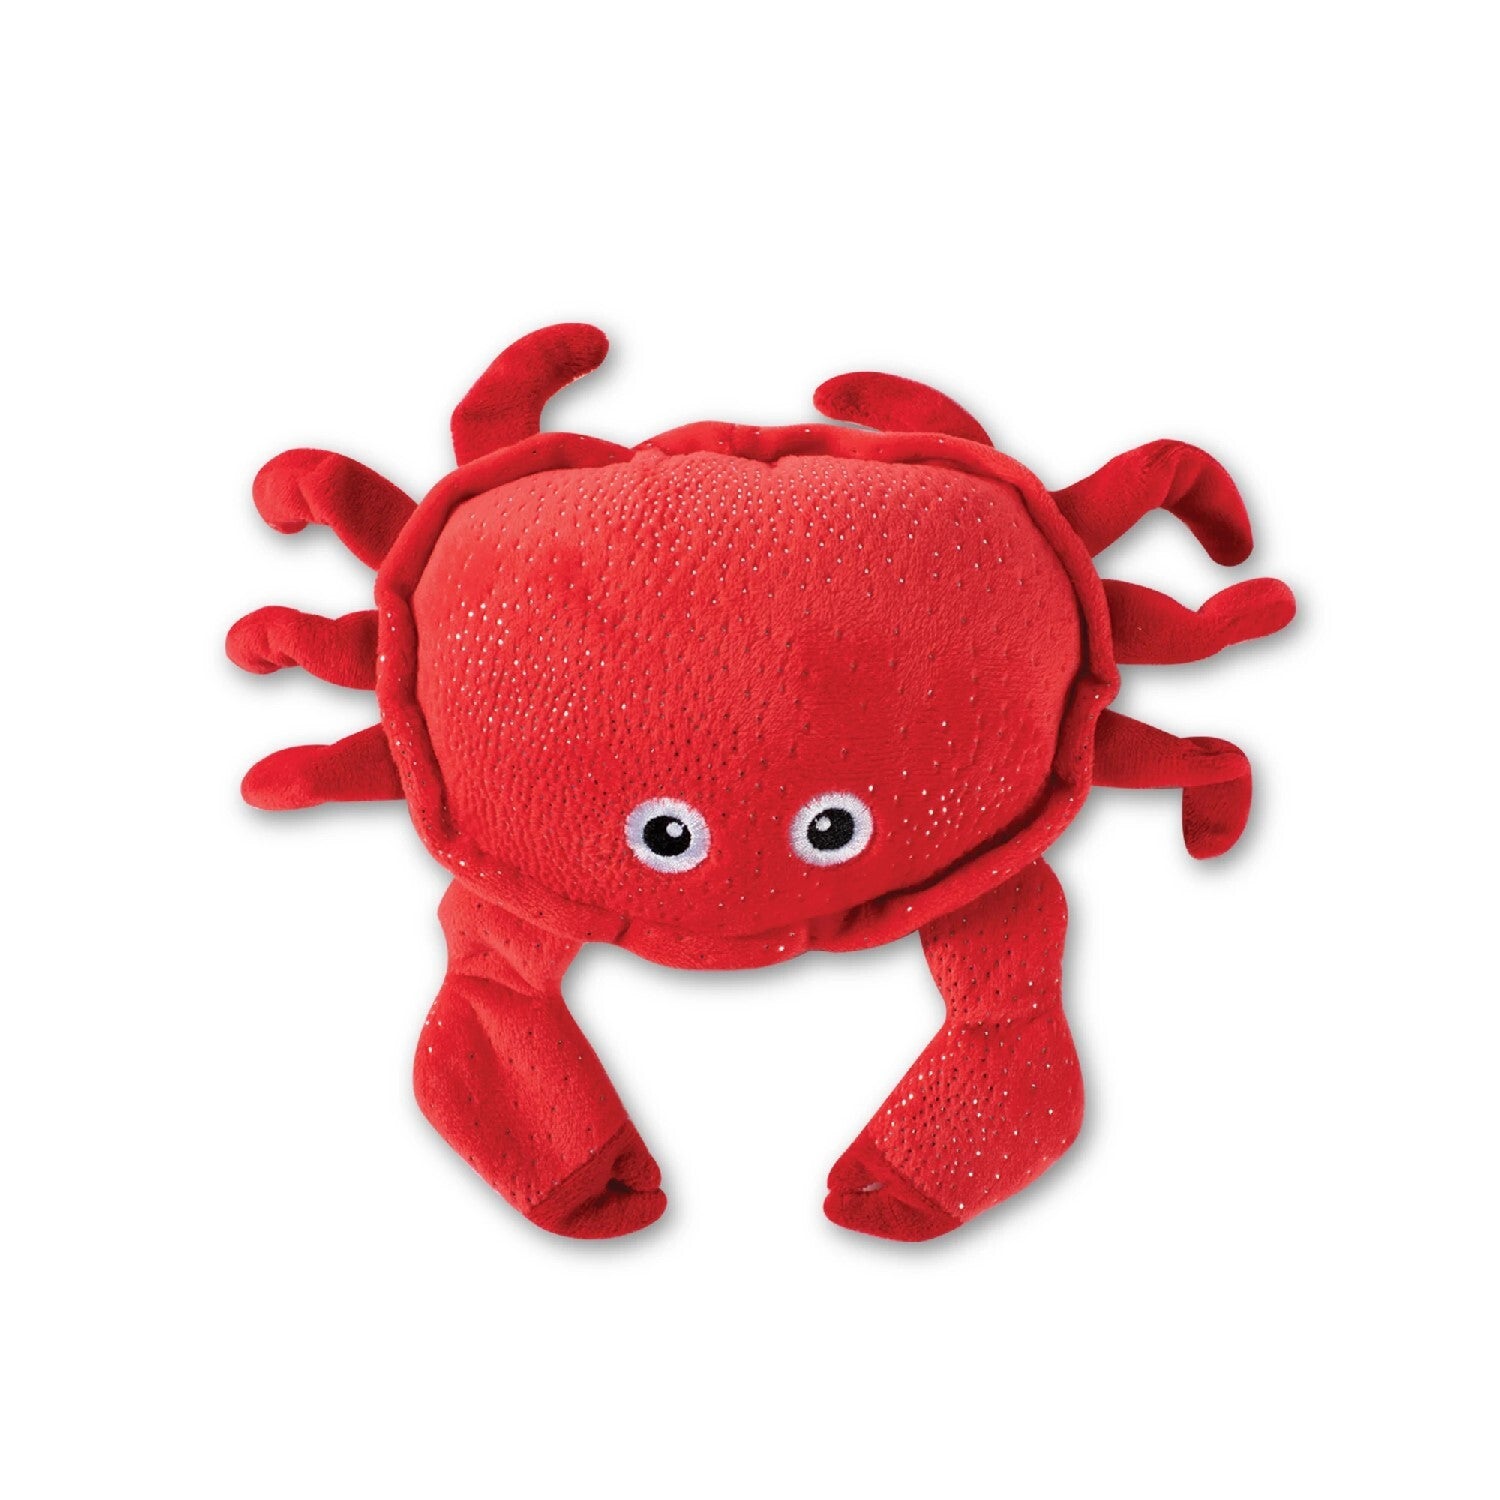 Fringe Studio PetShop Just A Little Crabby  |  Squeaky Plush Toy